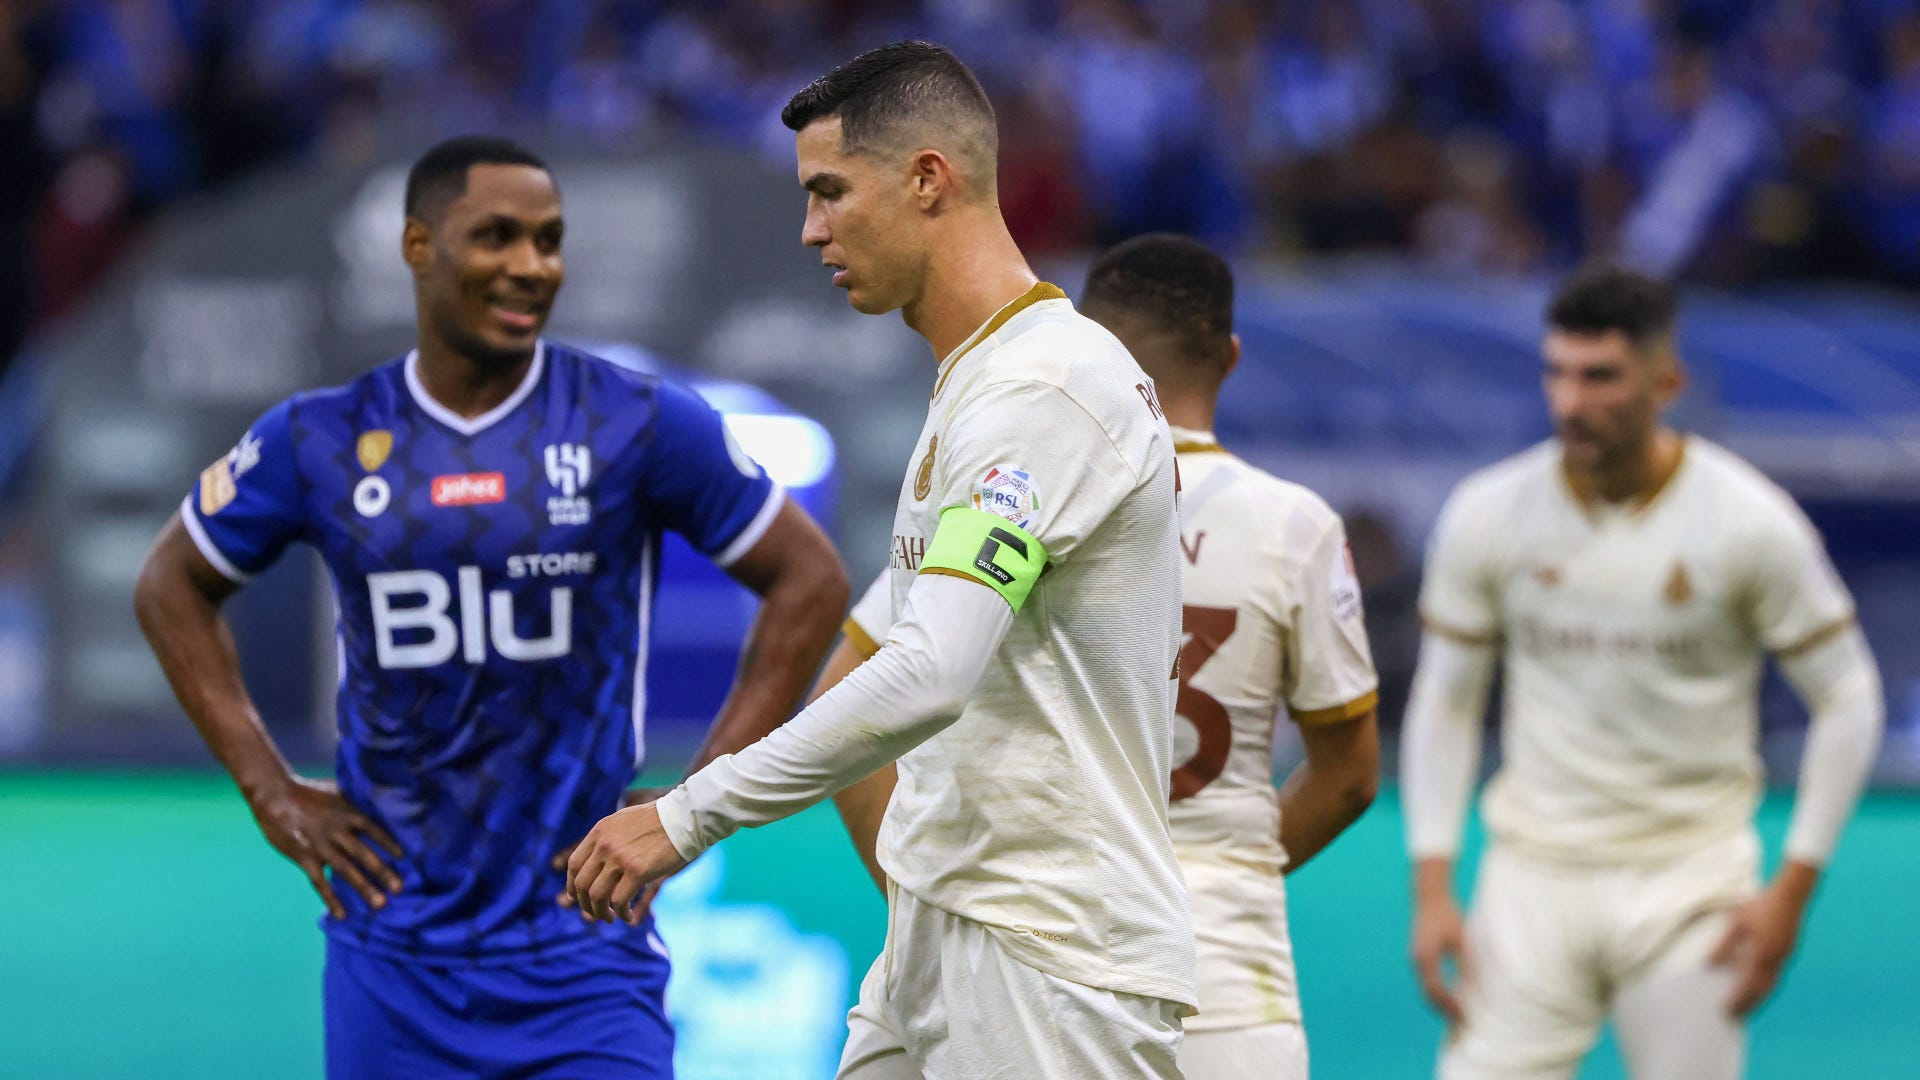 WATCH Cristiano Ronaldo booked after taking out Al-Hilal player with headlock during Al-Nassr defeat Goal India